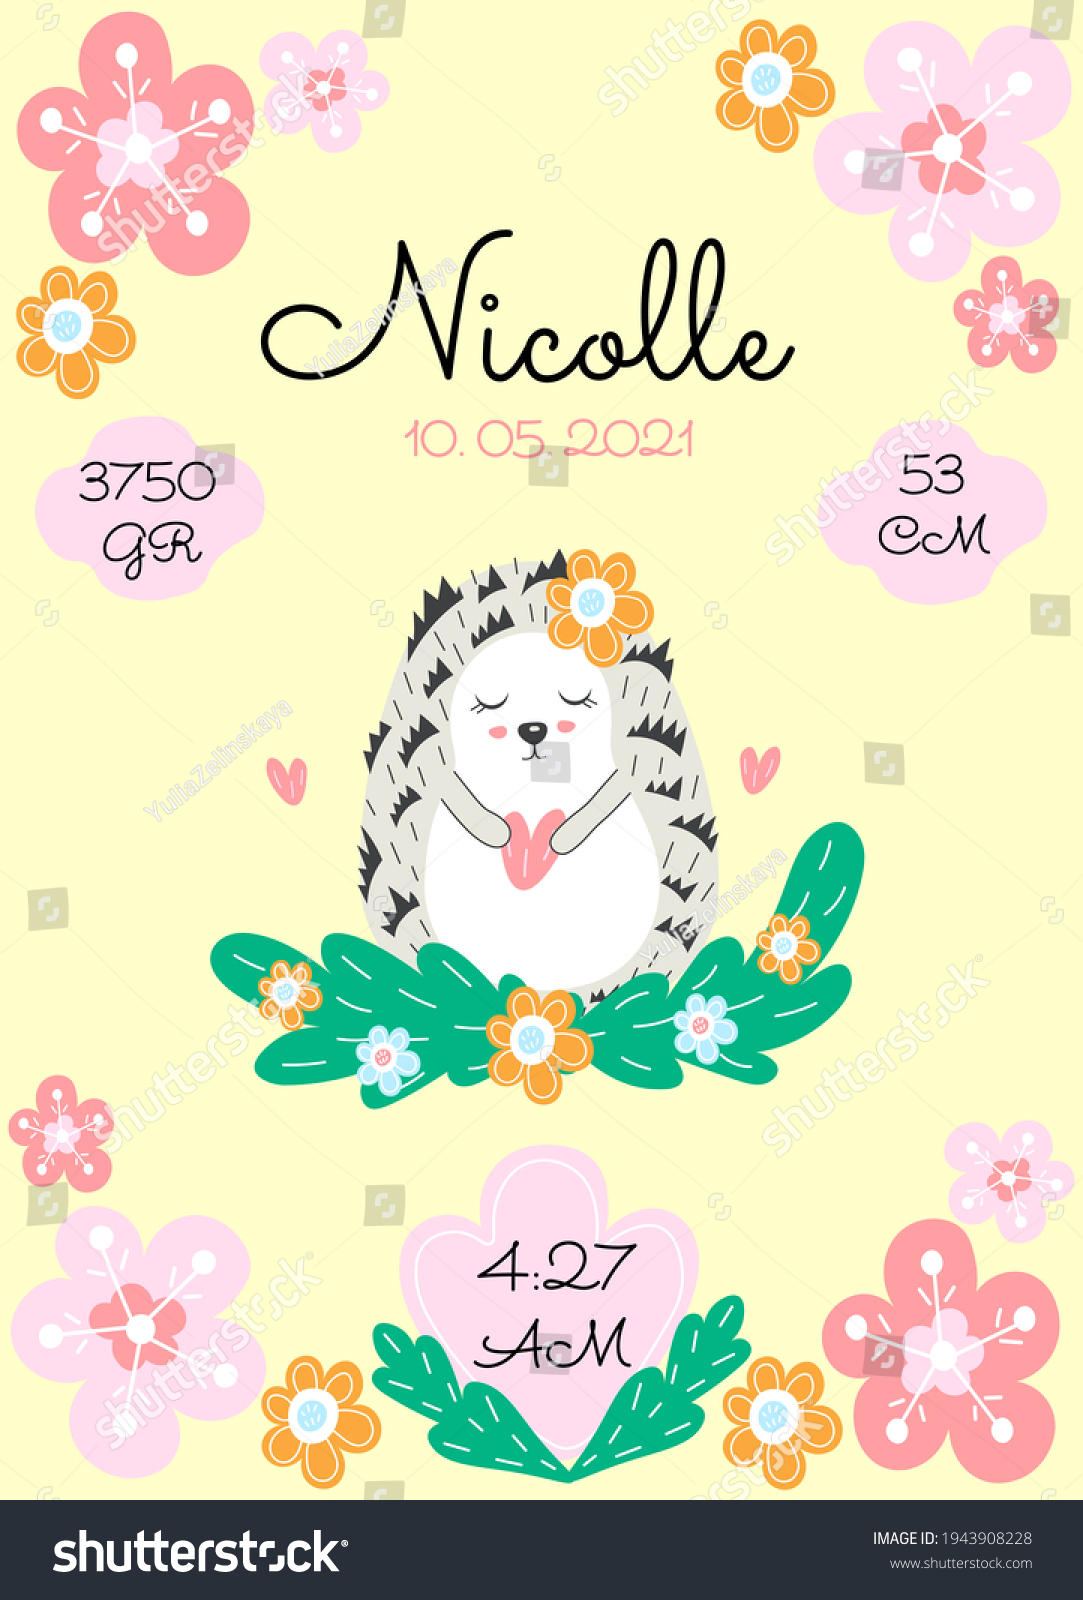 SVG of Personalize newborn baby metric poster with cute hedgehog and flowers. Date, cm, gr, time
 svg